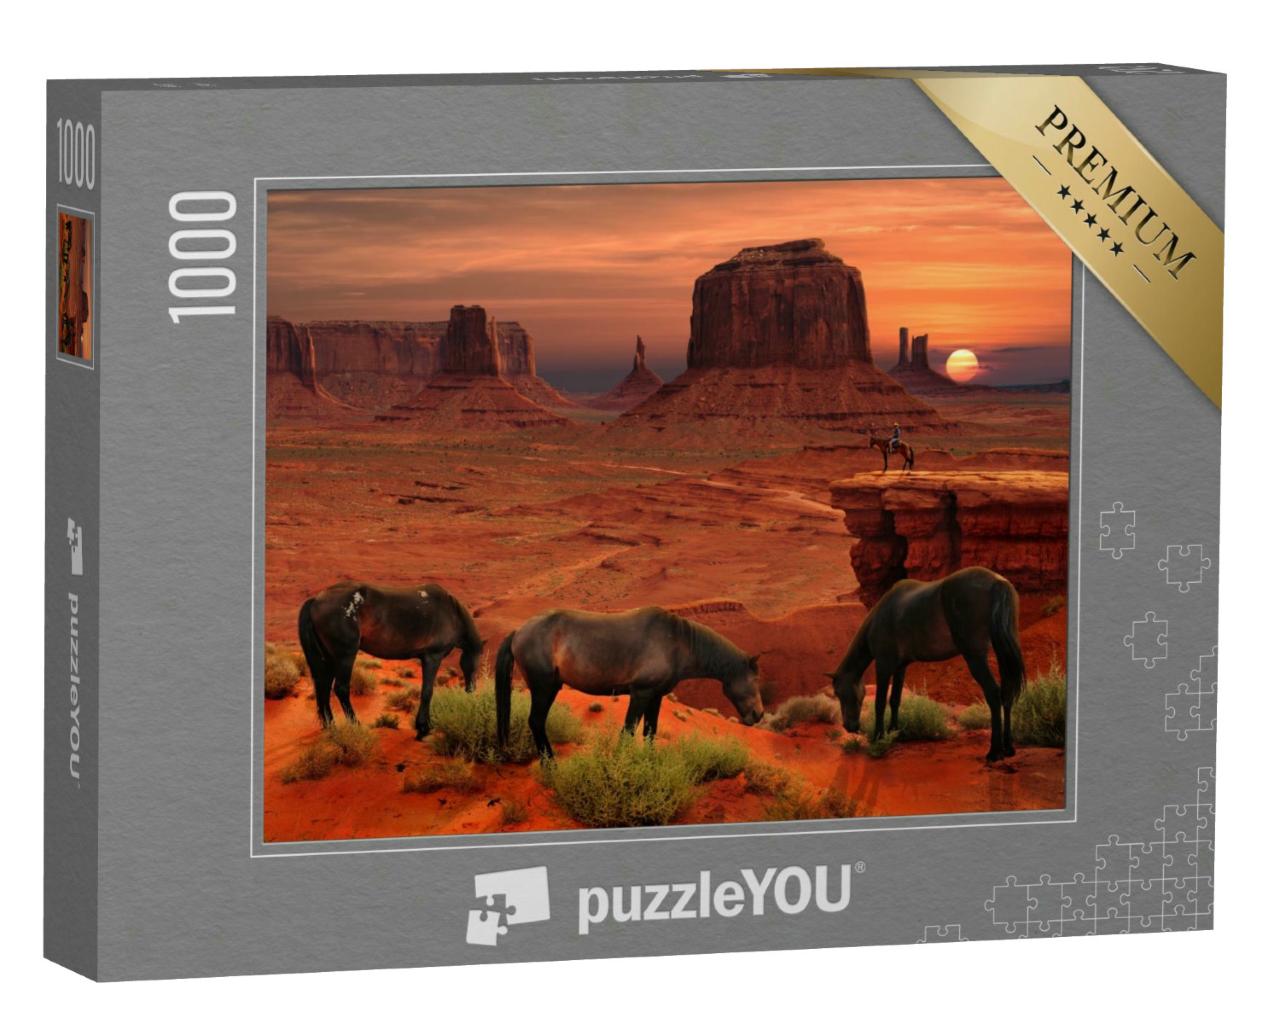 Puzzle 1000 Teile „Pferde am John Ford's Point, Monument Valley Tribal Park, Arizona, USA“